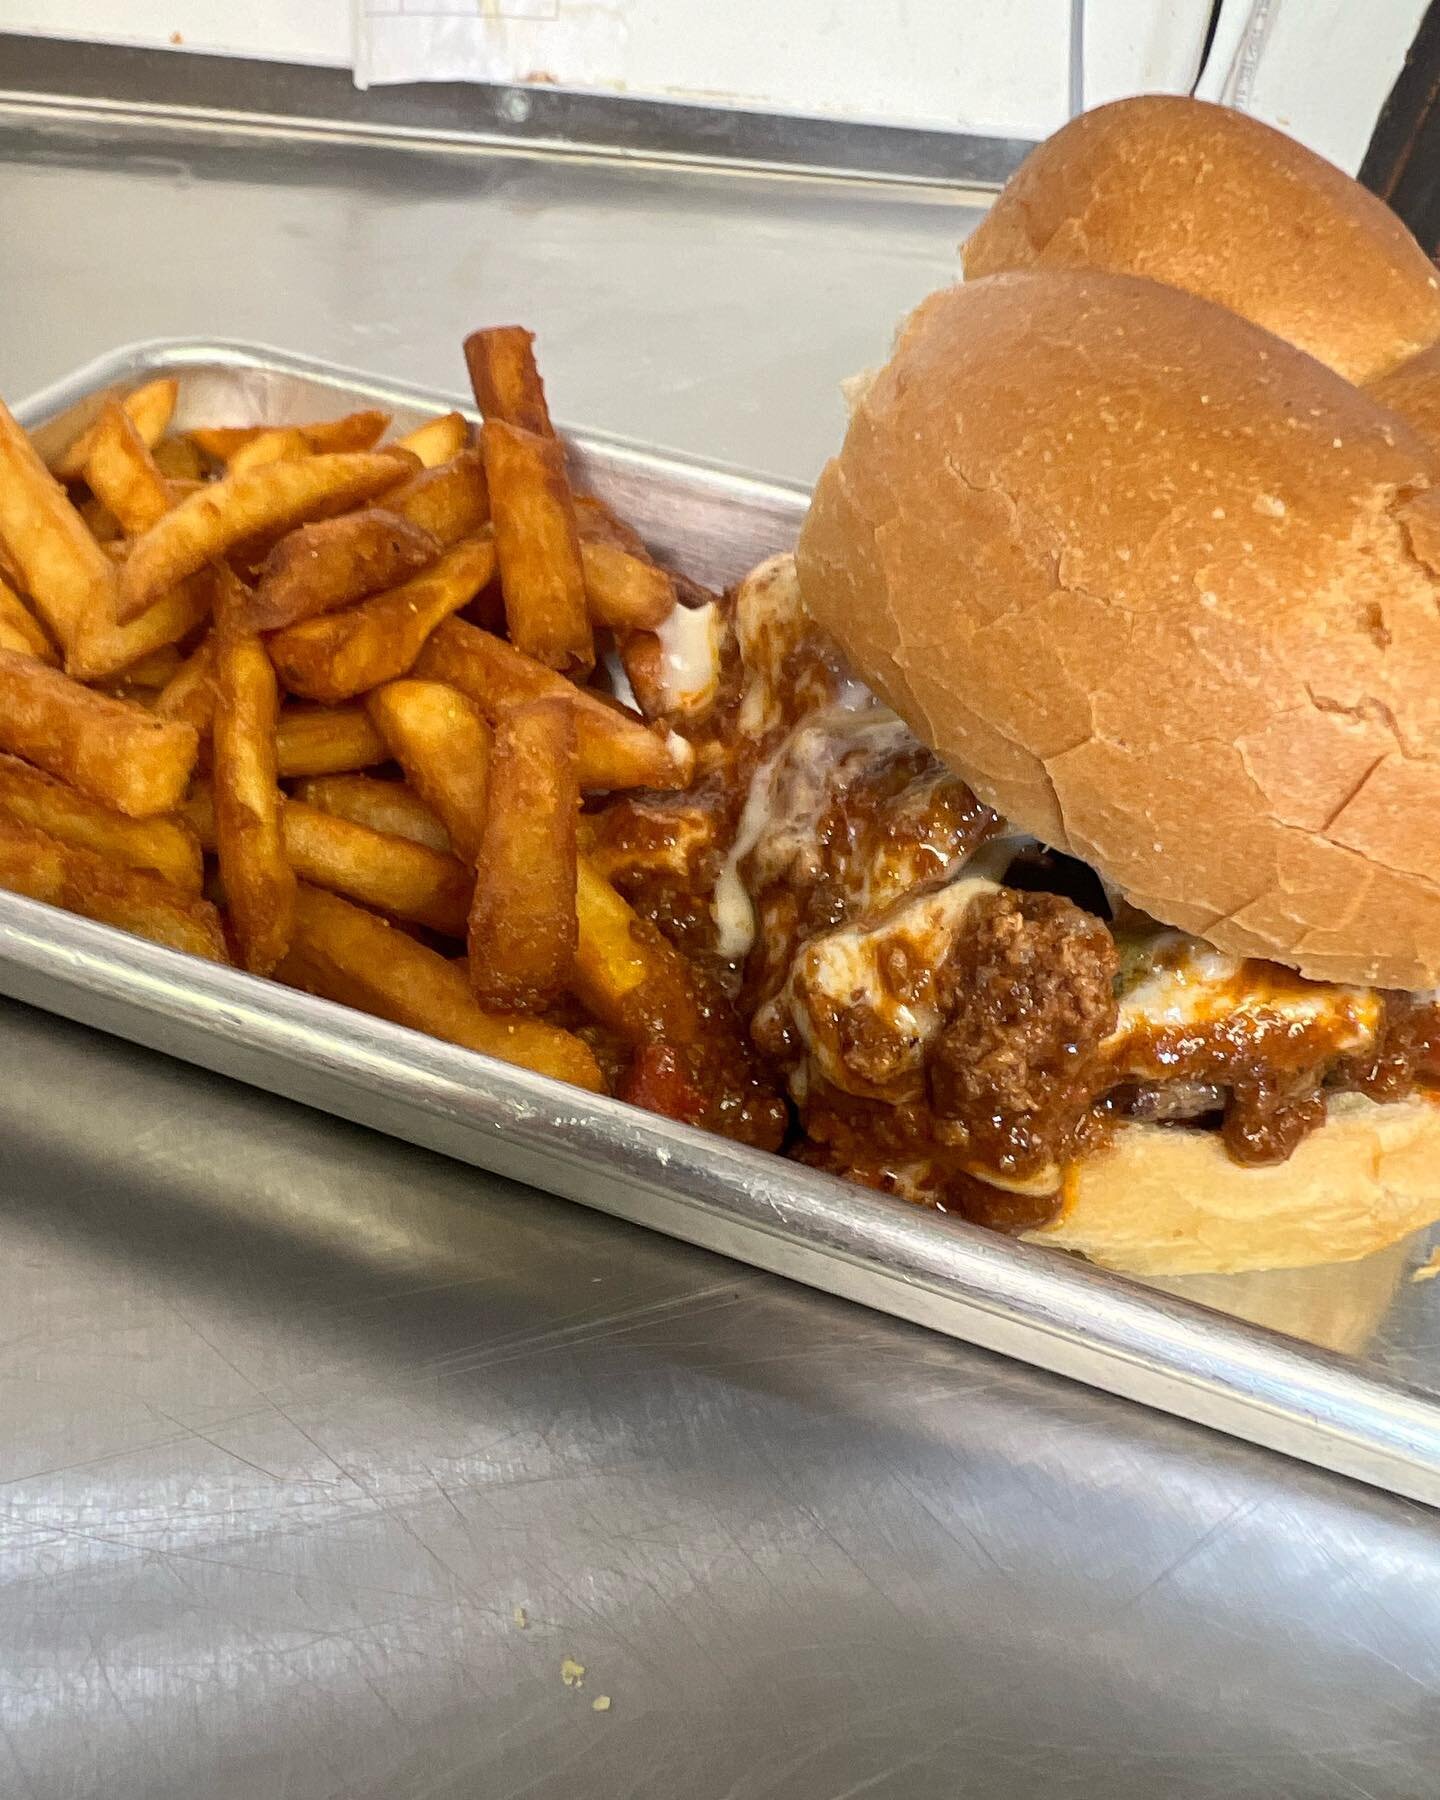 ‼️ TODAY&rsquo;S SPECIAL ‼️

The Chili Con Queso Burger | $9.00 

Burger cooked to your liking topped with Bacon, Jalepenos, our Homemade Queso and Chili served with Battered French Fries